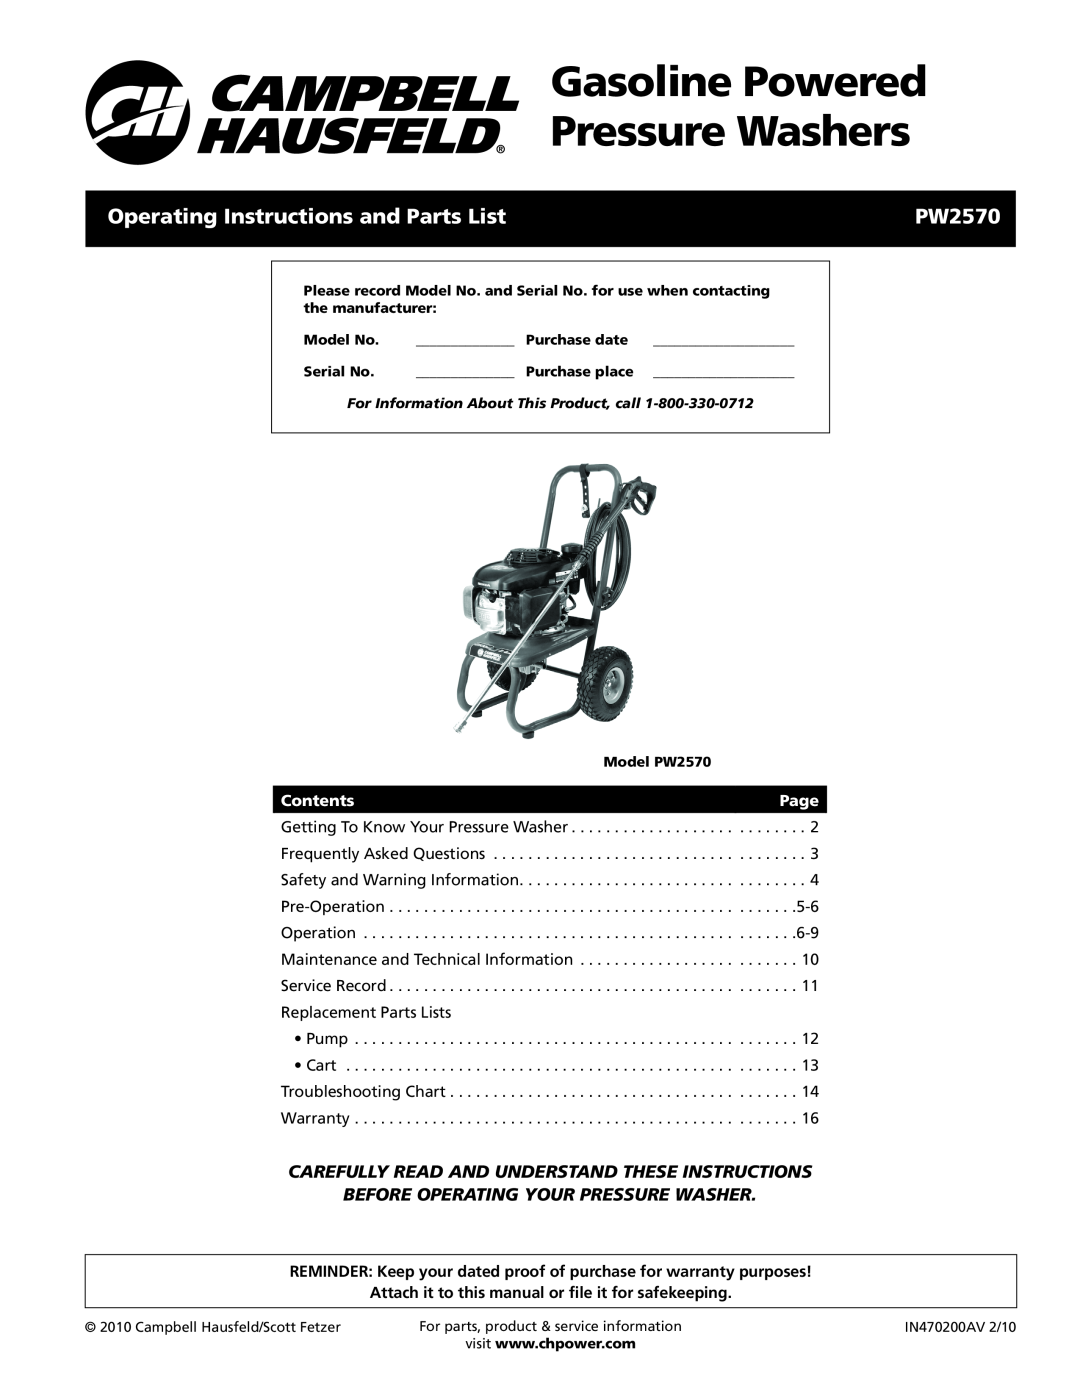 Campbell Hausfeld PW2570 operating instructions Gasoline Powered Pressure Washers, Operating Instructions and Parts List 